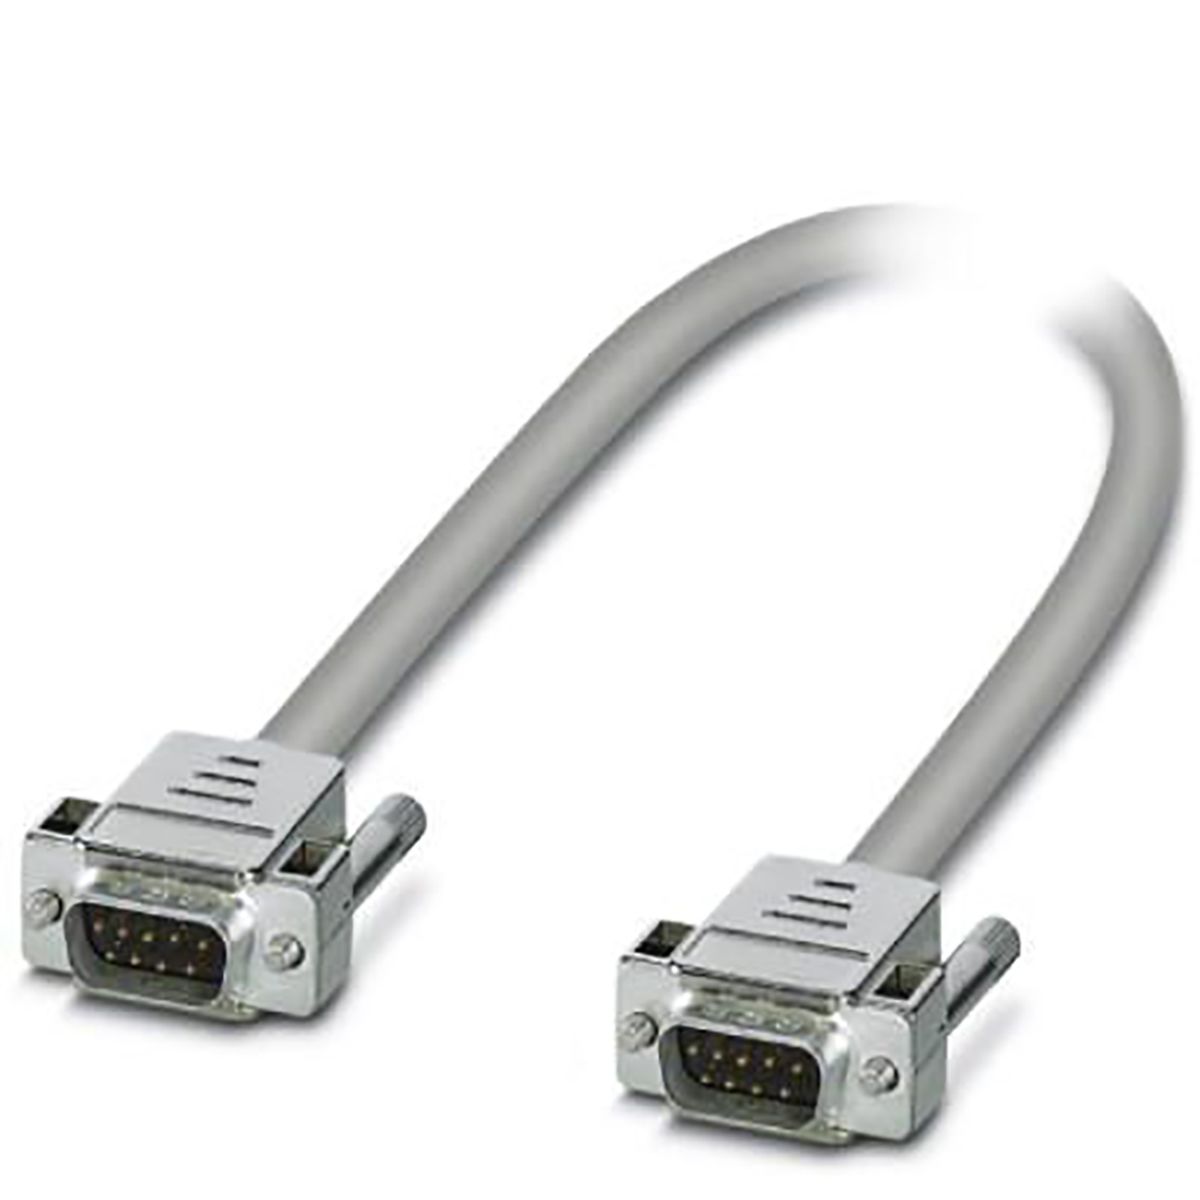 Phoenix Contact 1m 9 pin D-sub to 9 pin D-sub Serial Cable